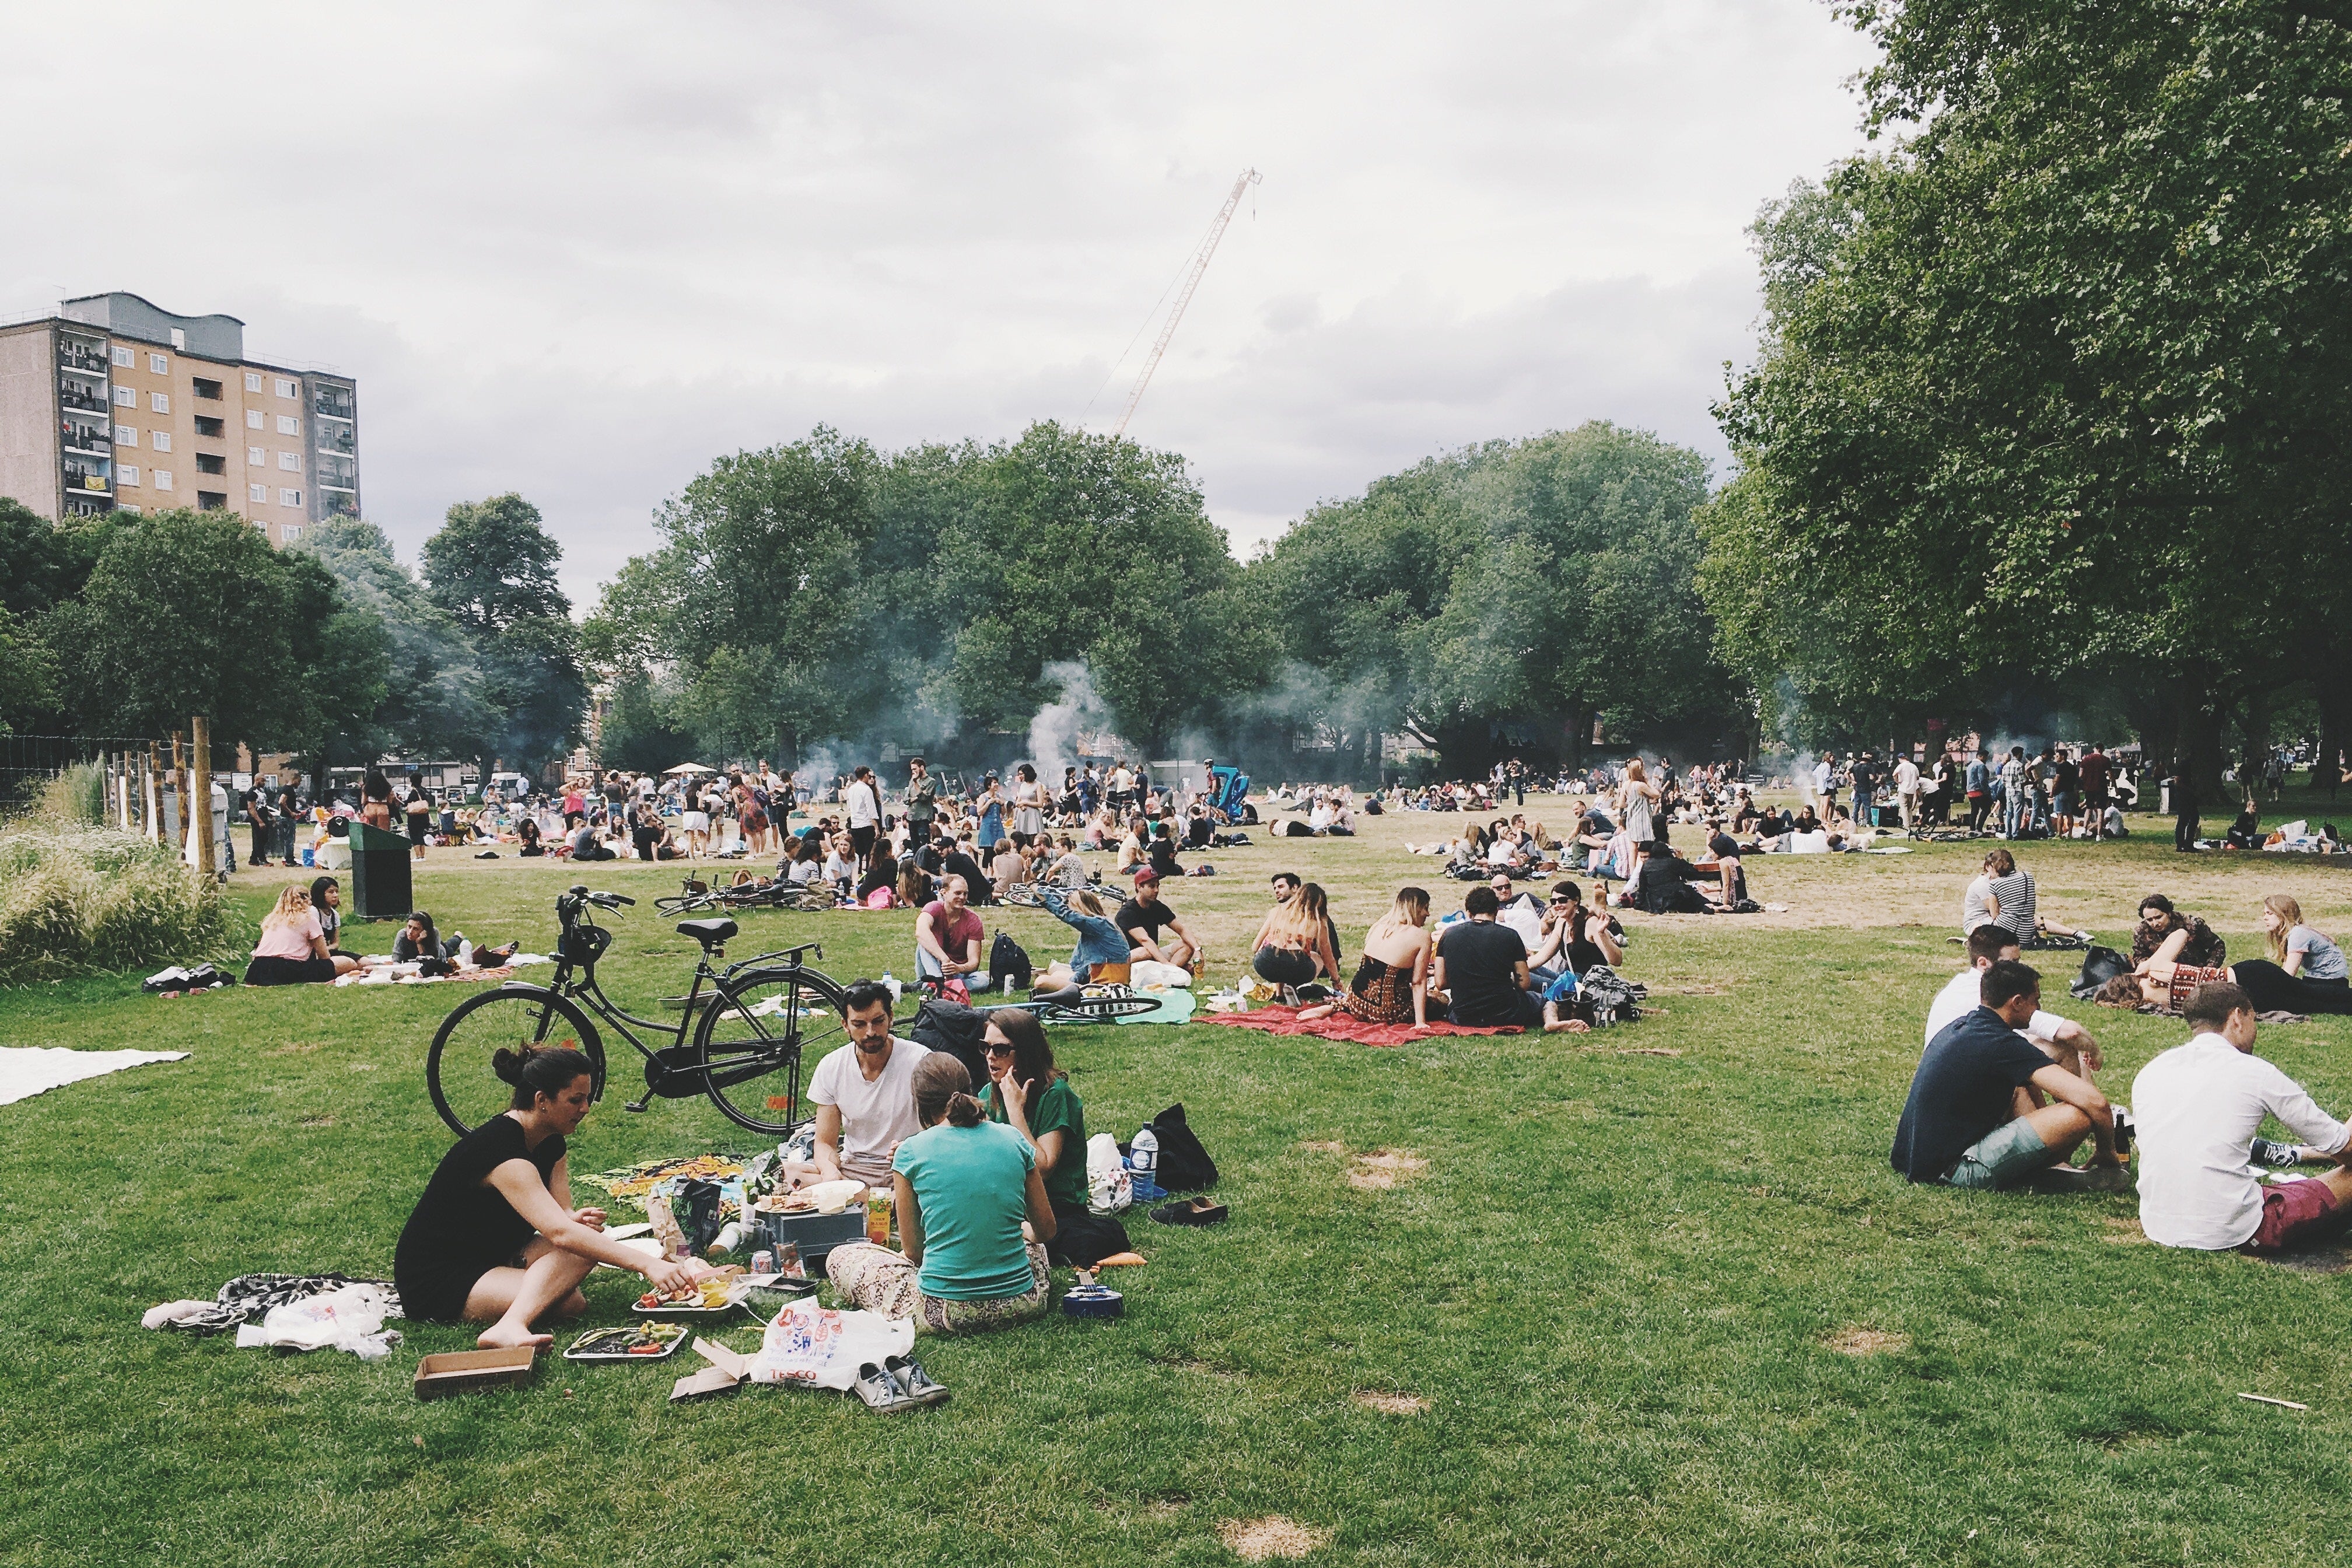 People picnicking in an urban park.